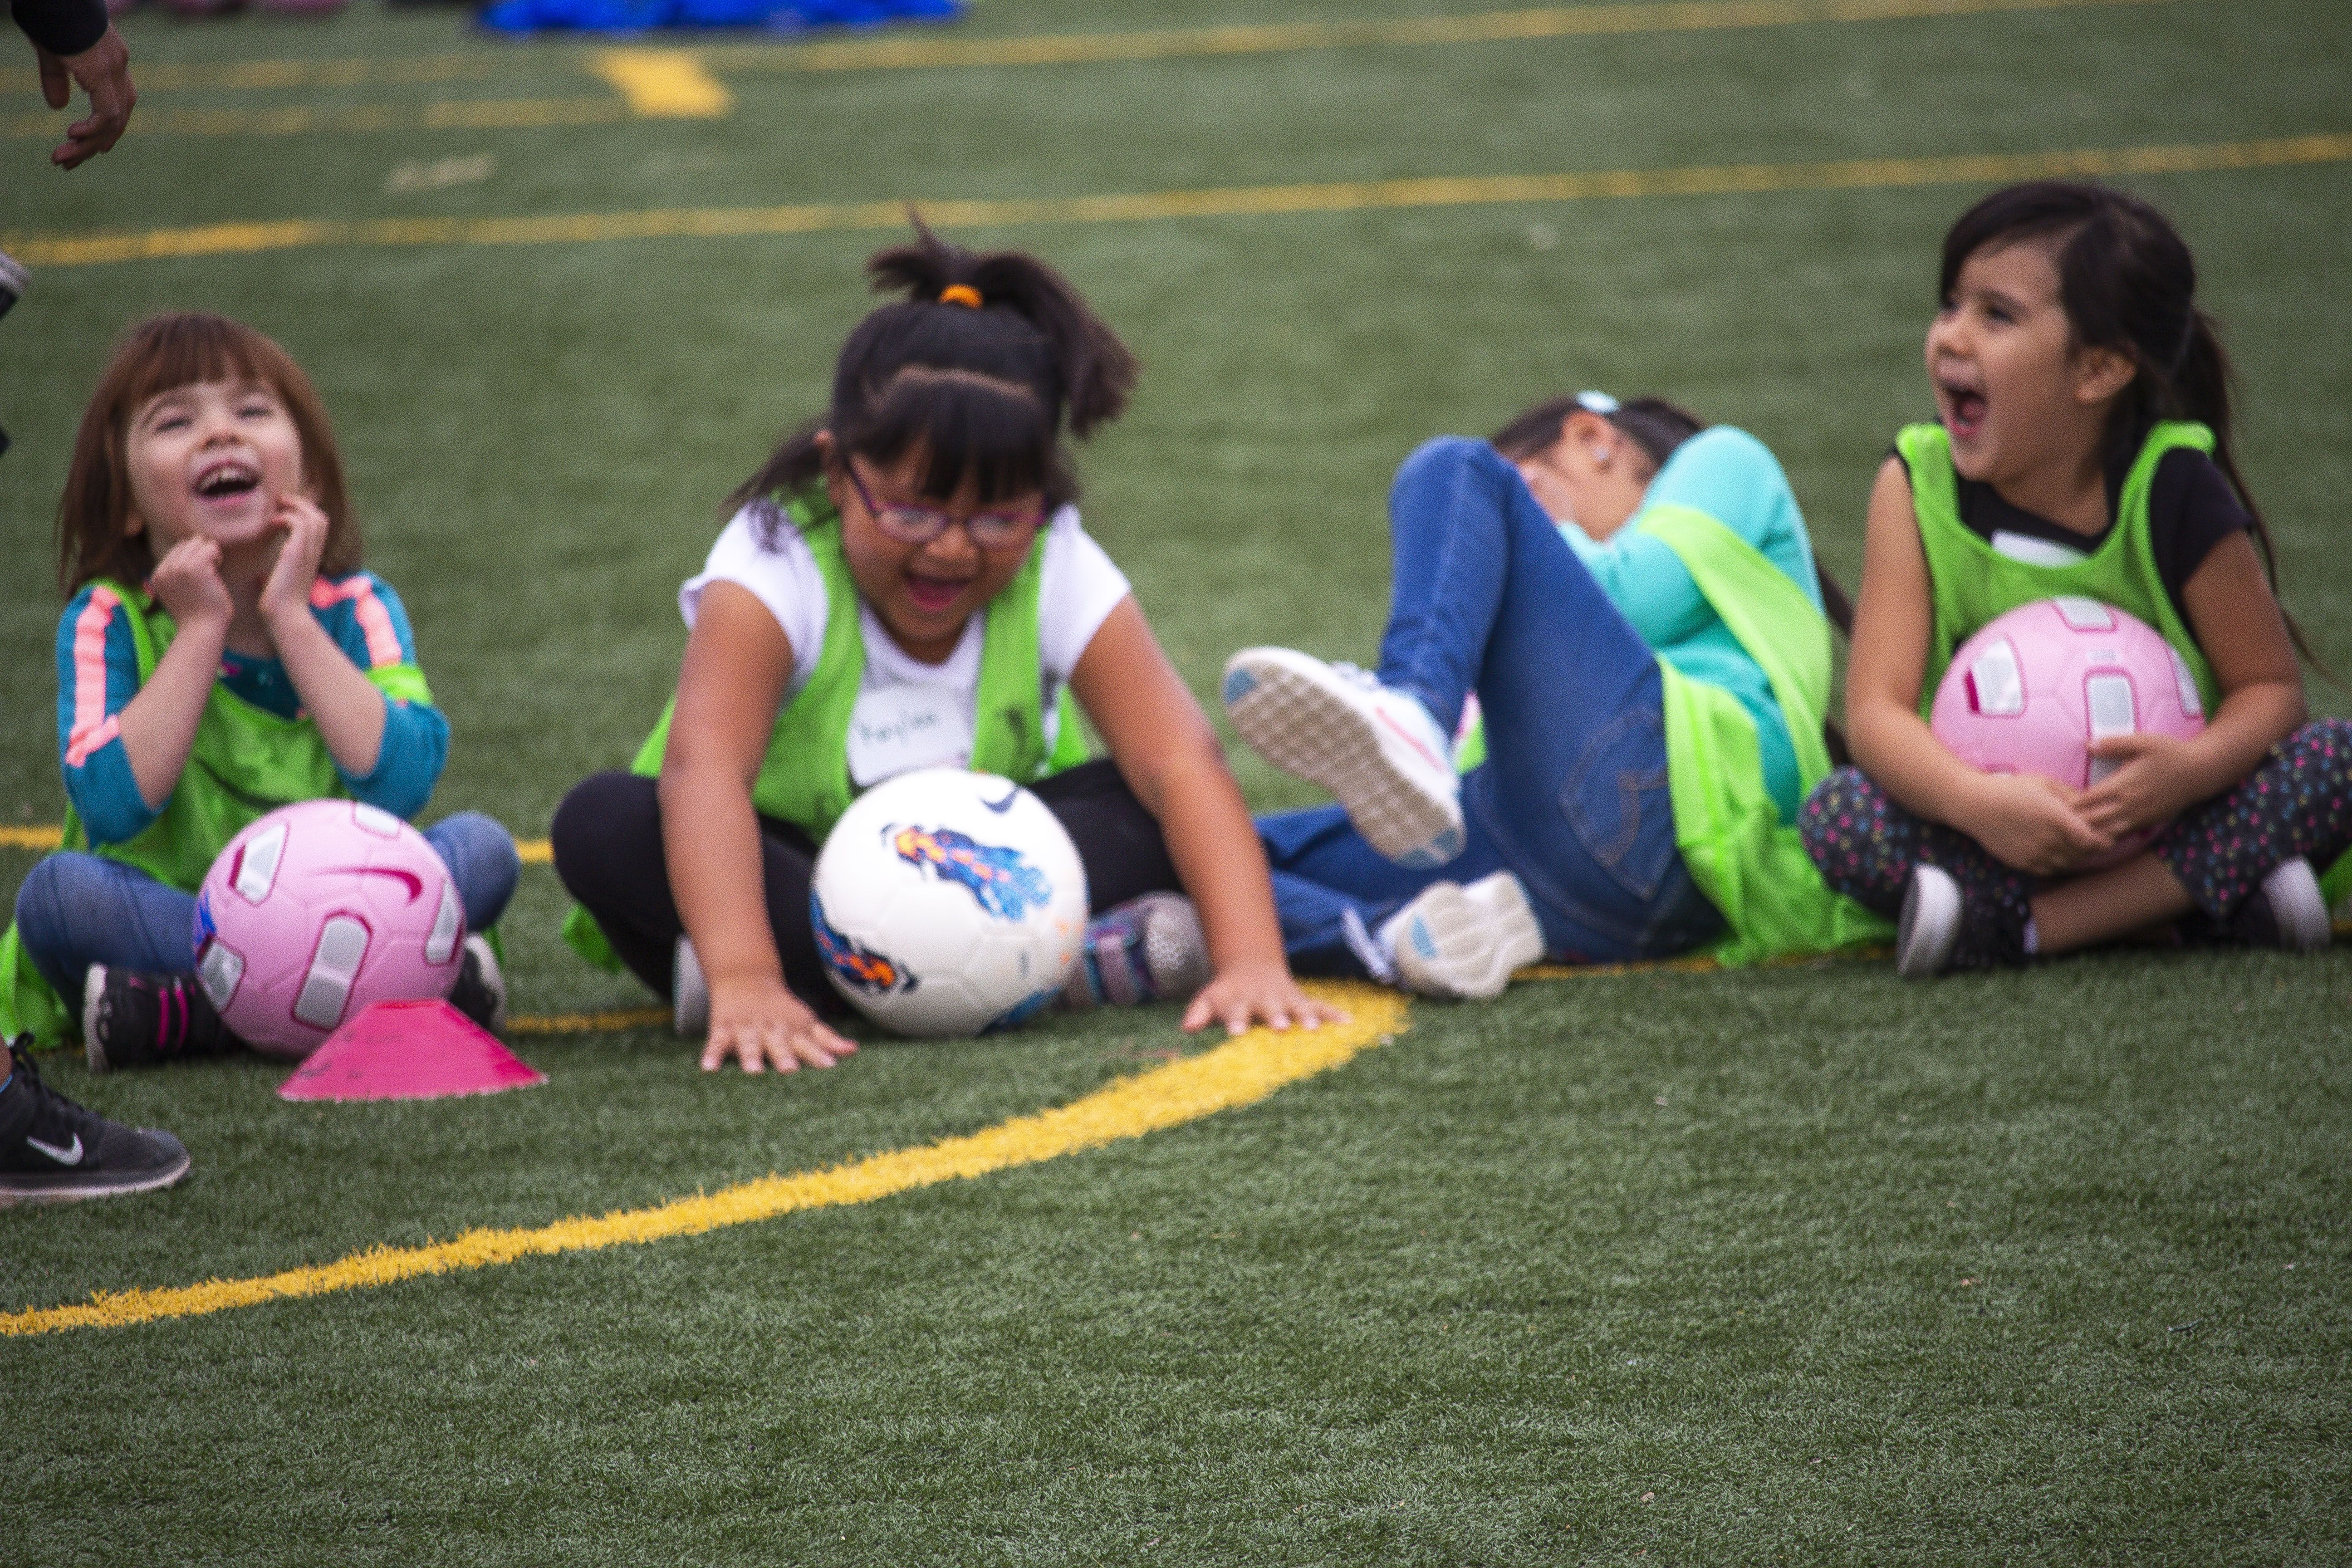 Students prepared for a scrimmage during the soccer clinic at Carroll Elementary School in Bernalillo, New Mexico. They laughed as their classmates were counted off into groups by fruit names like banana, strawberry, and apple. Image by Viridiana Vidales Coyt. United States, 2017.